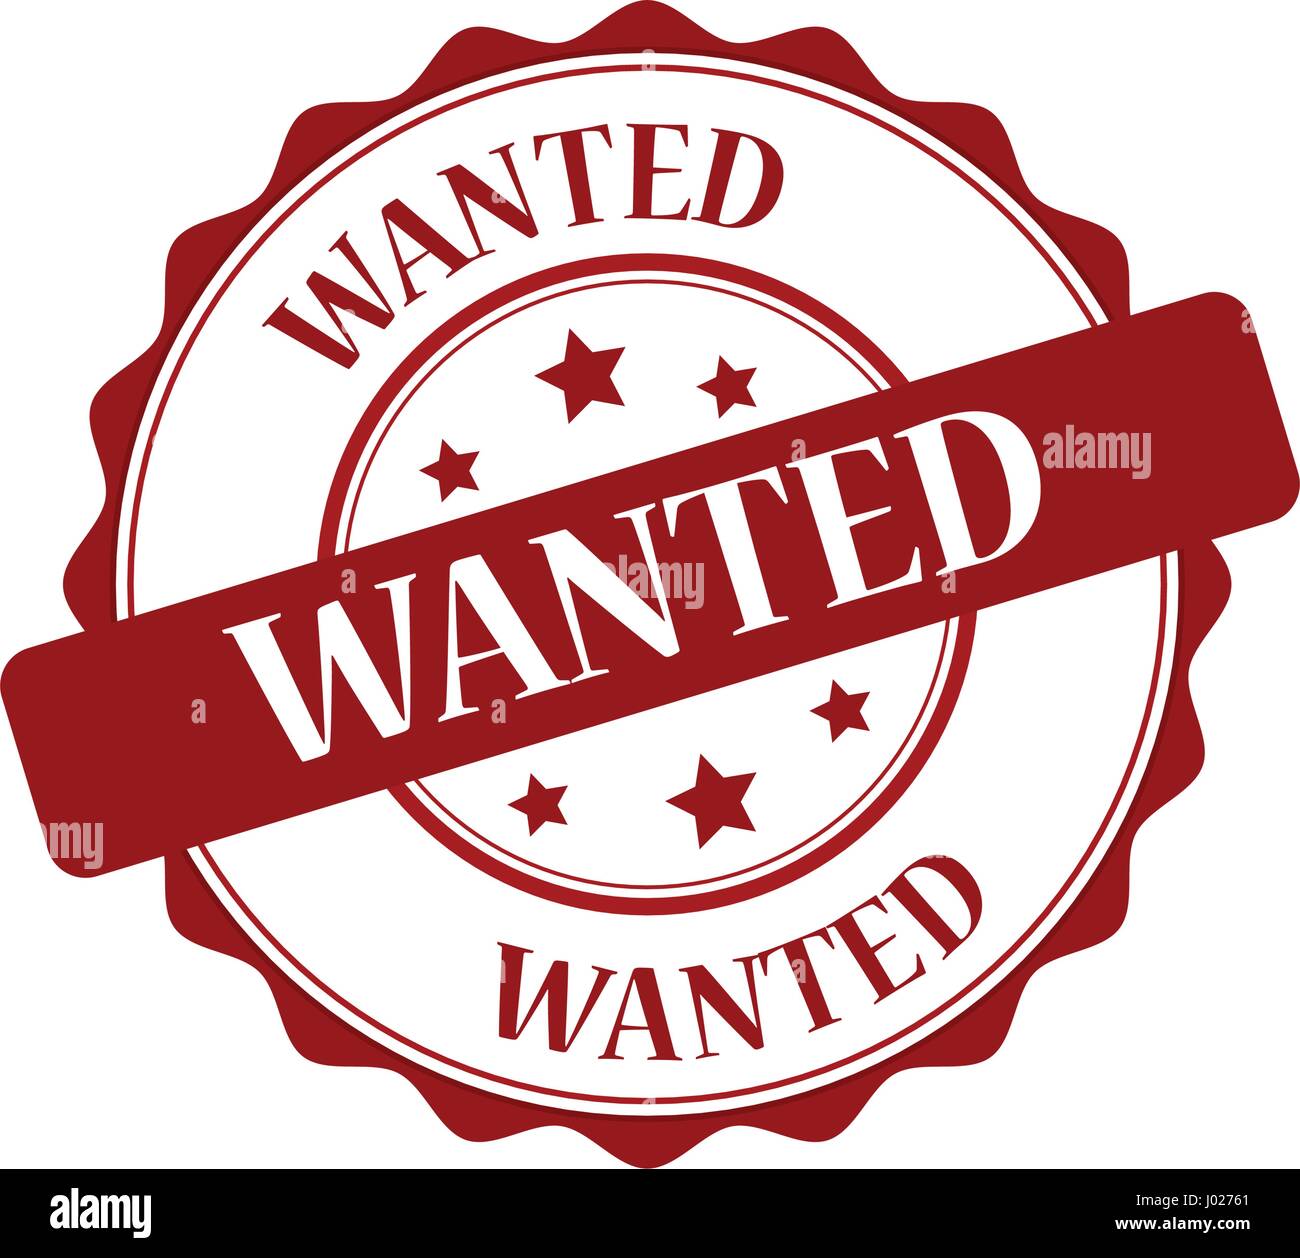 Wanted red stamp illustration Stock Vector